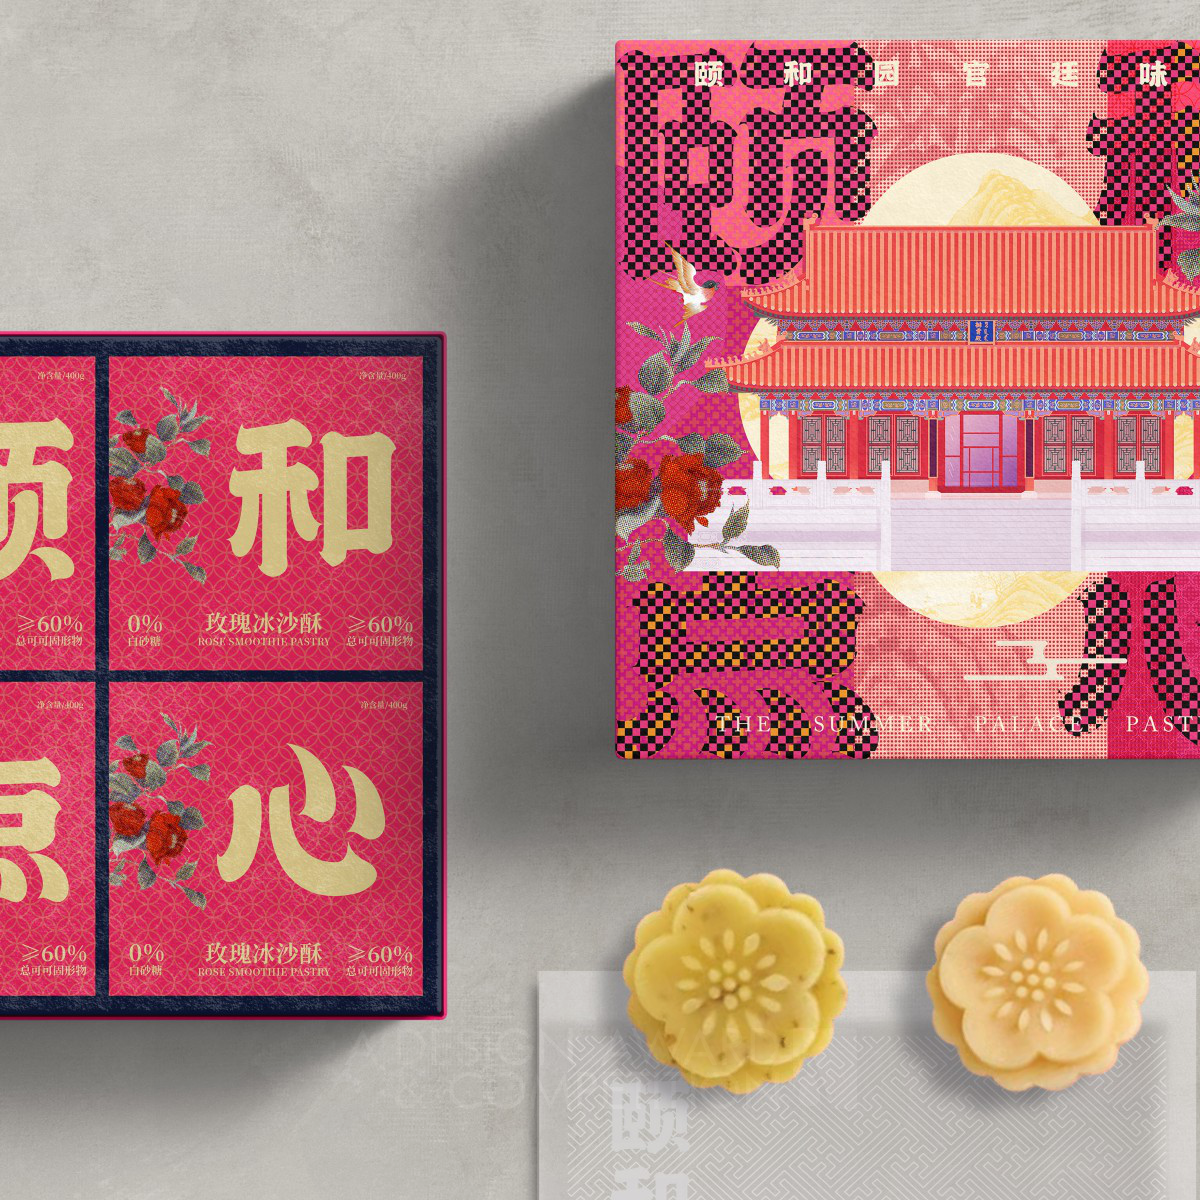 Beijing Jiaotong University wins Bronze at the prestigious A' Packaging Design Award with Yihe Dim Sum Package Design.